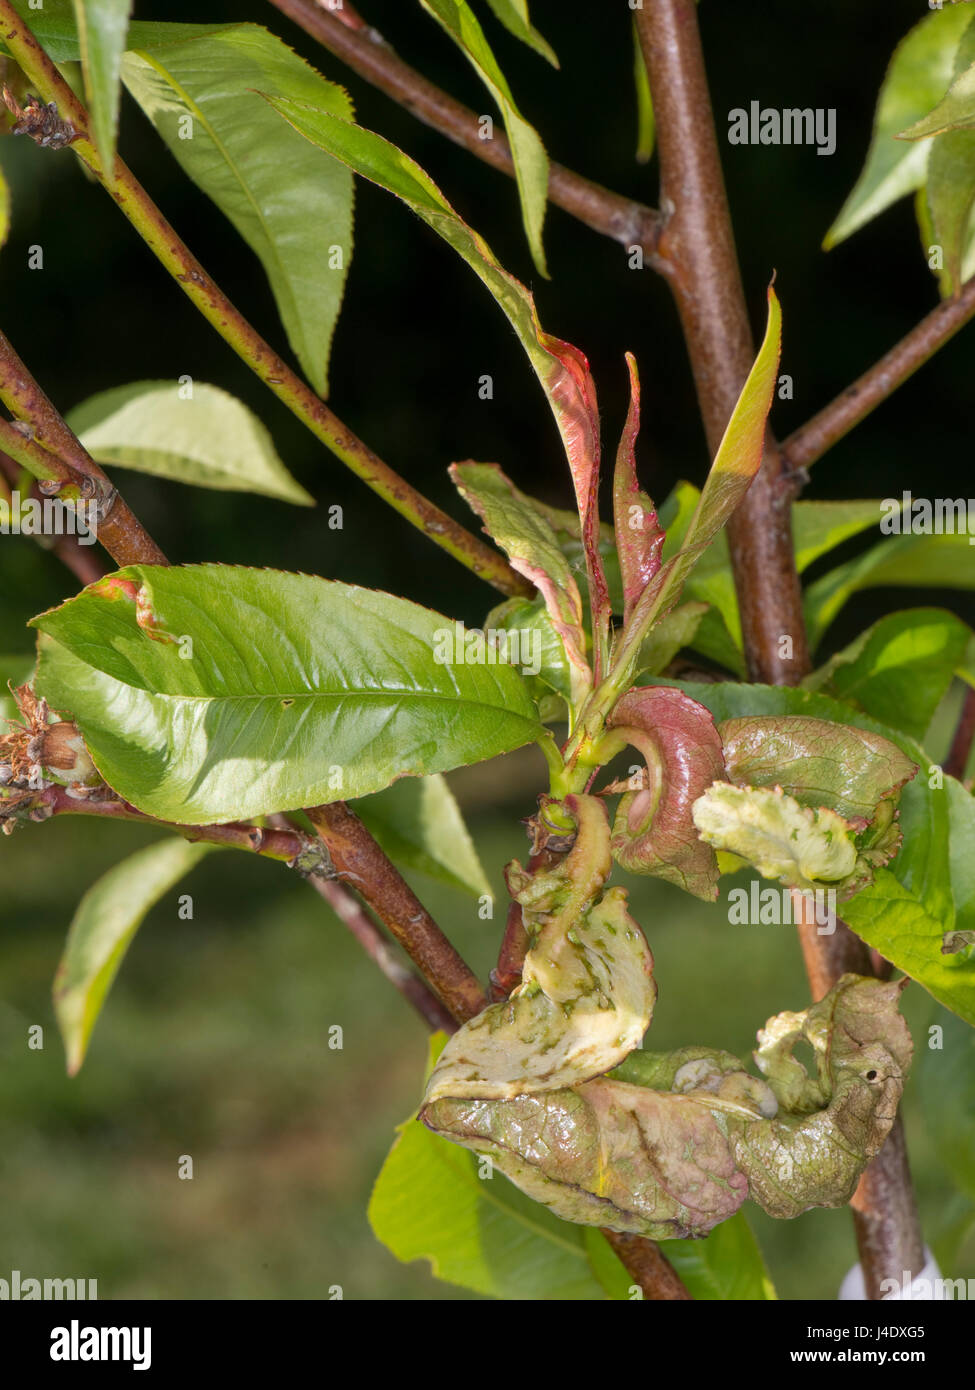 Peach leaf curl, Taphrina deformans, deformed leaves on a small nectarine tree 'Lord Napier' caused by a fungus Stock Photo